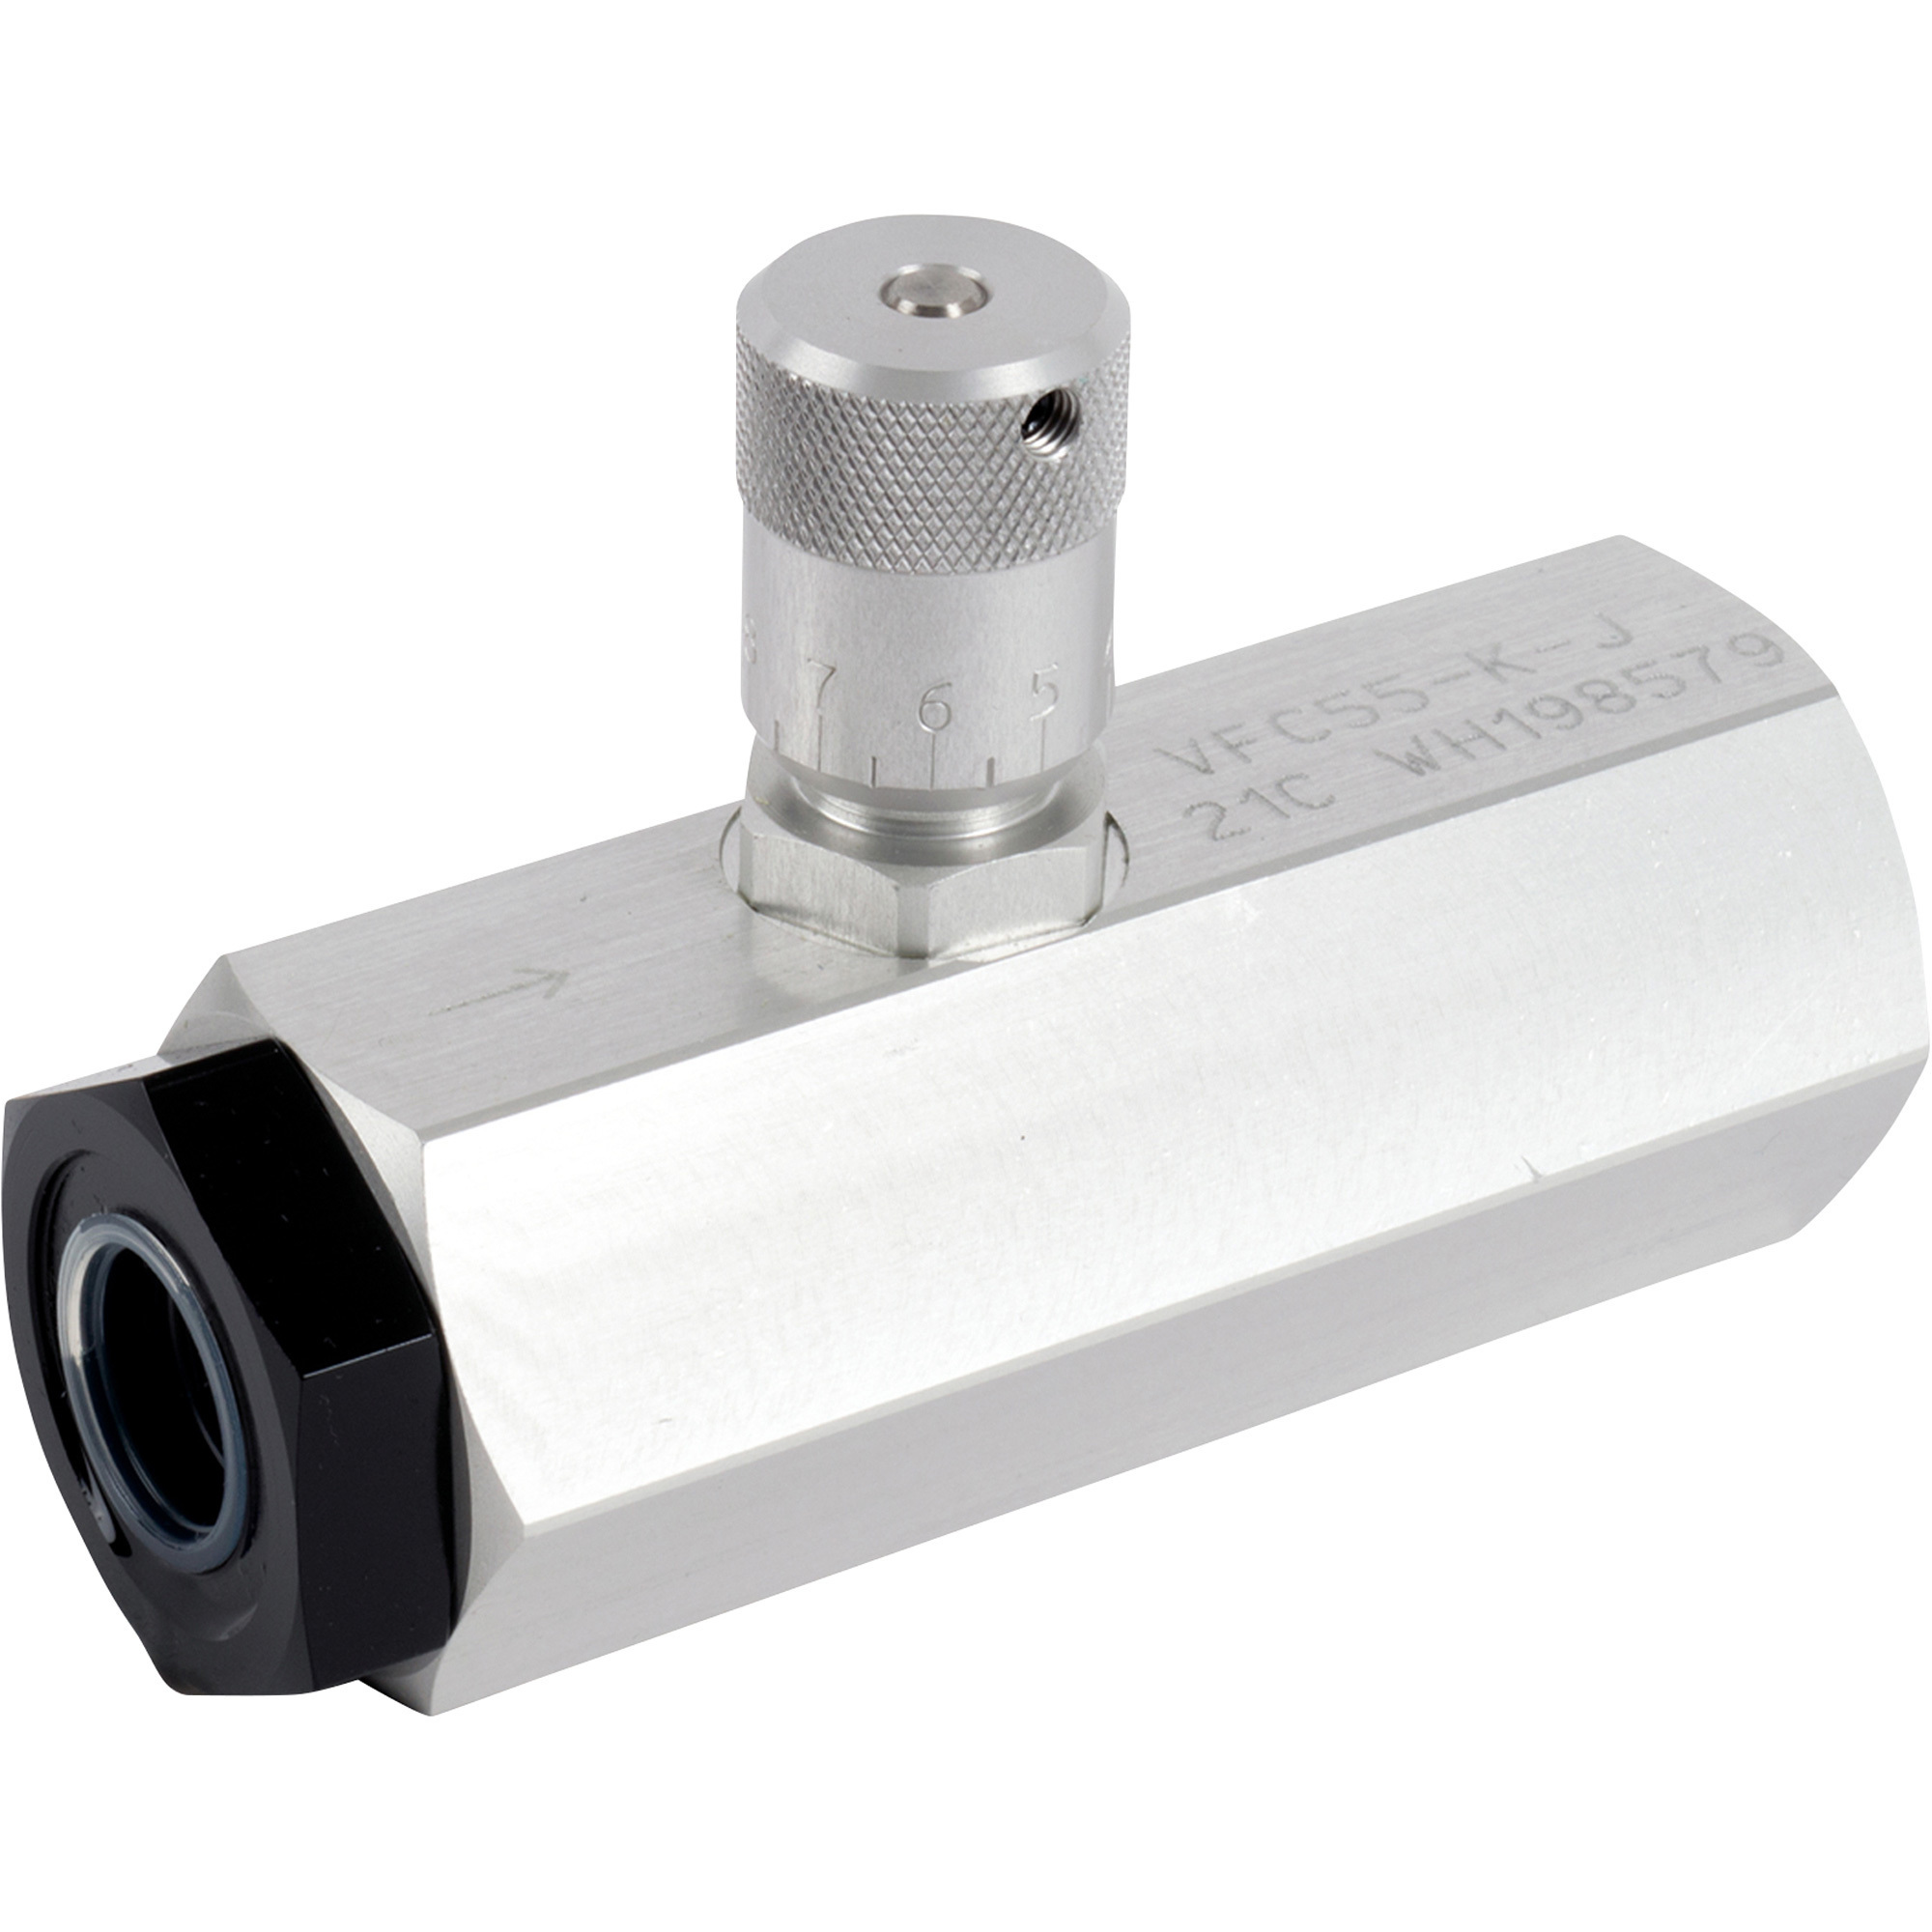 Webtec Variable Flow Control Valve, 15 GPM, 1/2Inch NPT Inlet, 1/2Inch NPT Outlet, Model VFC55-K-A